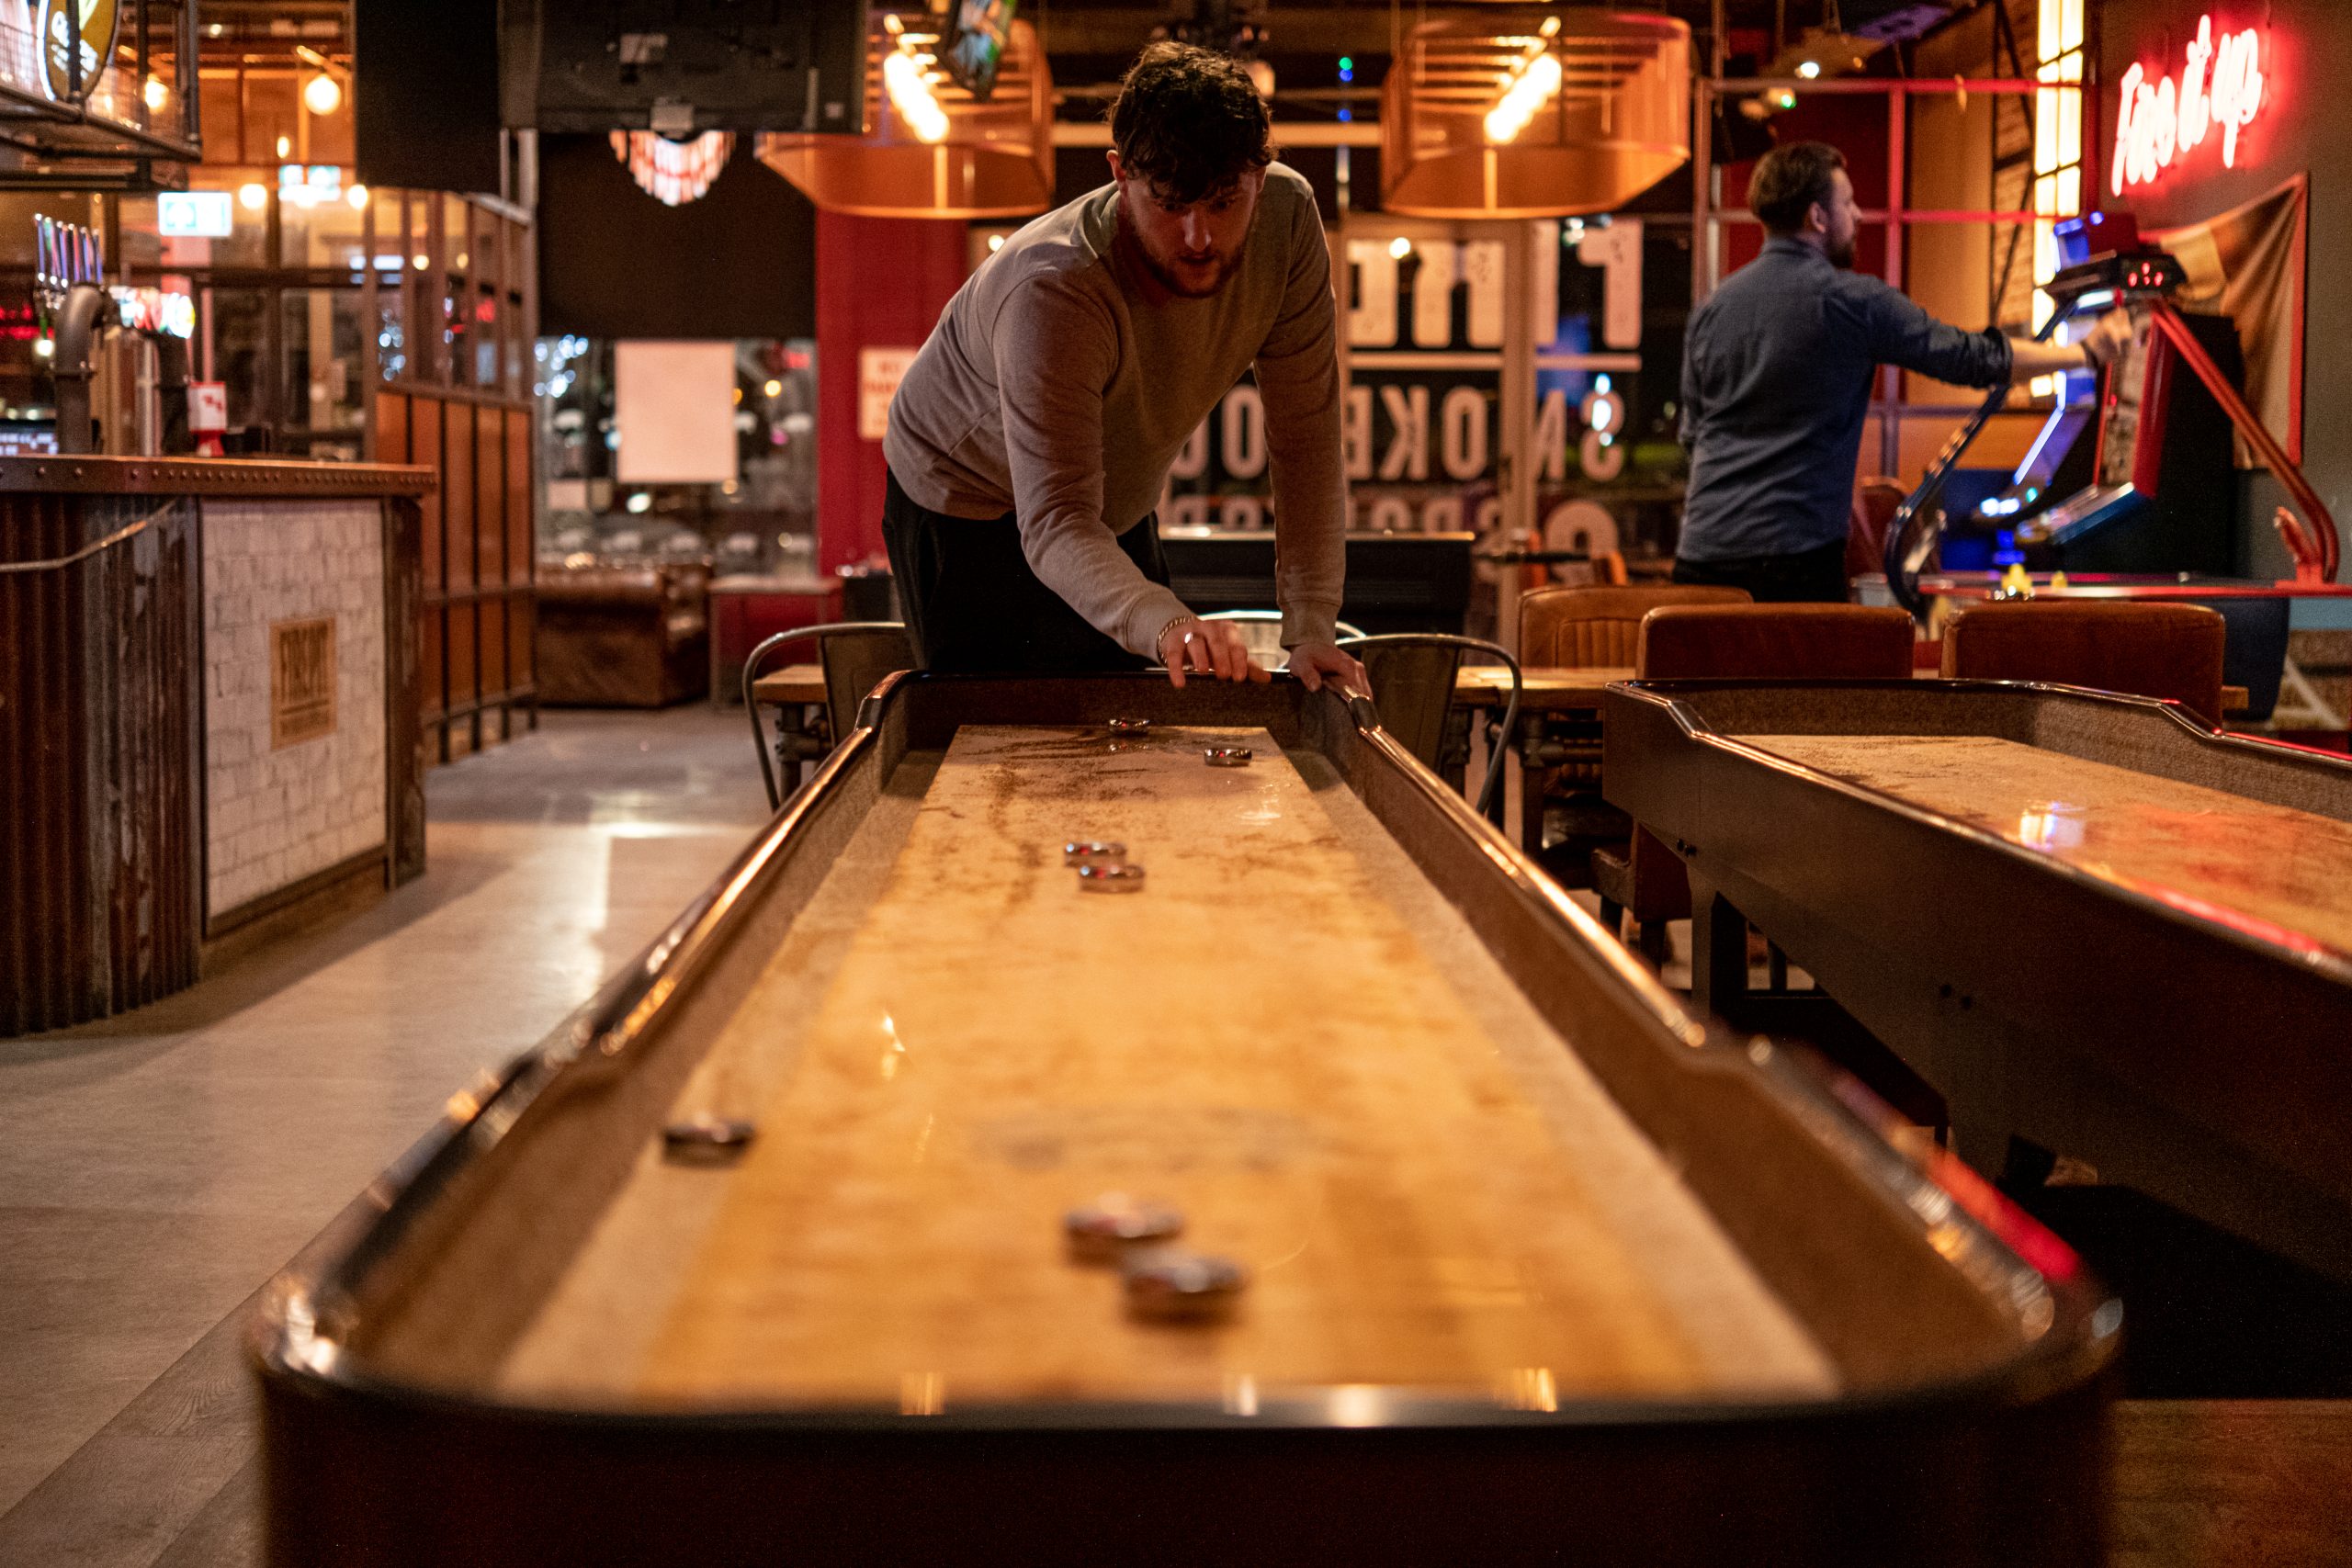 Enjoy a game of shuffleboard with friends at Firepit bars